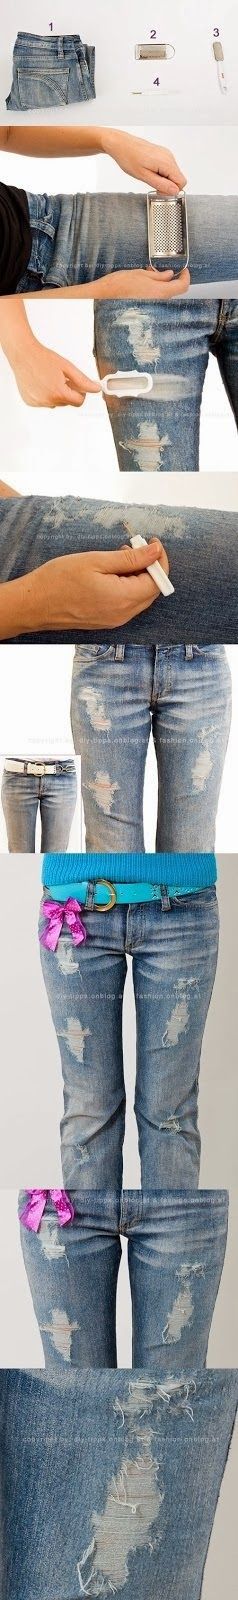 Easy DIY Crafts: Just in case I ever want to distress jeans